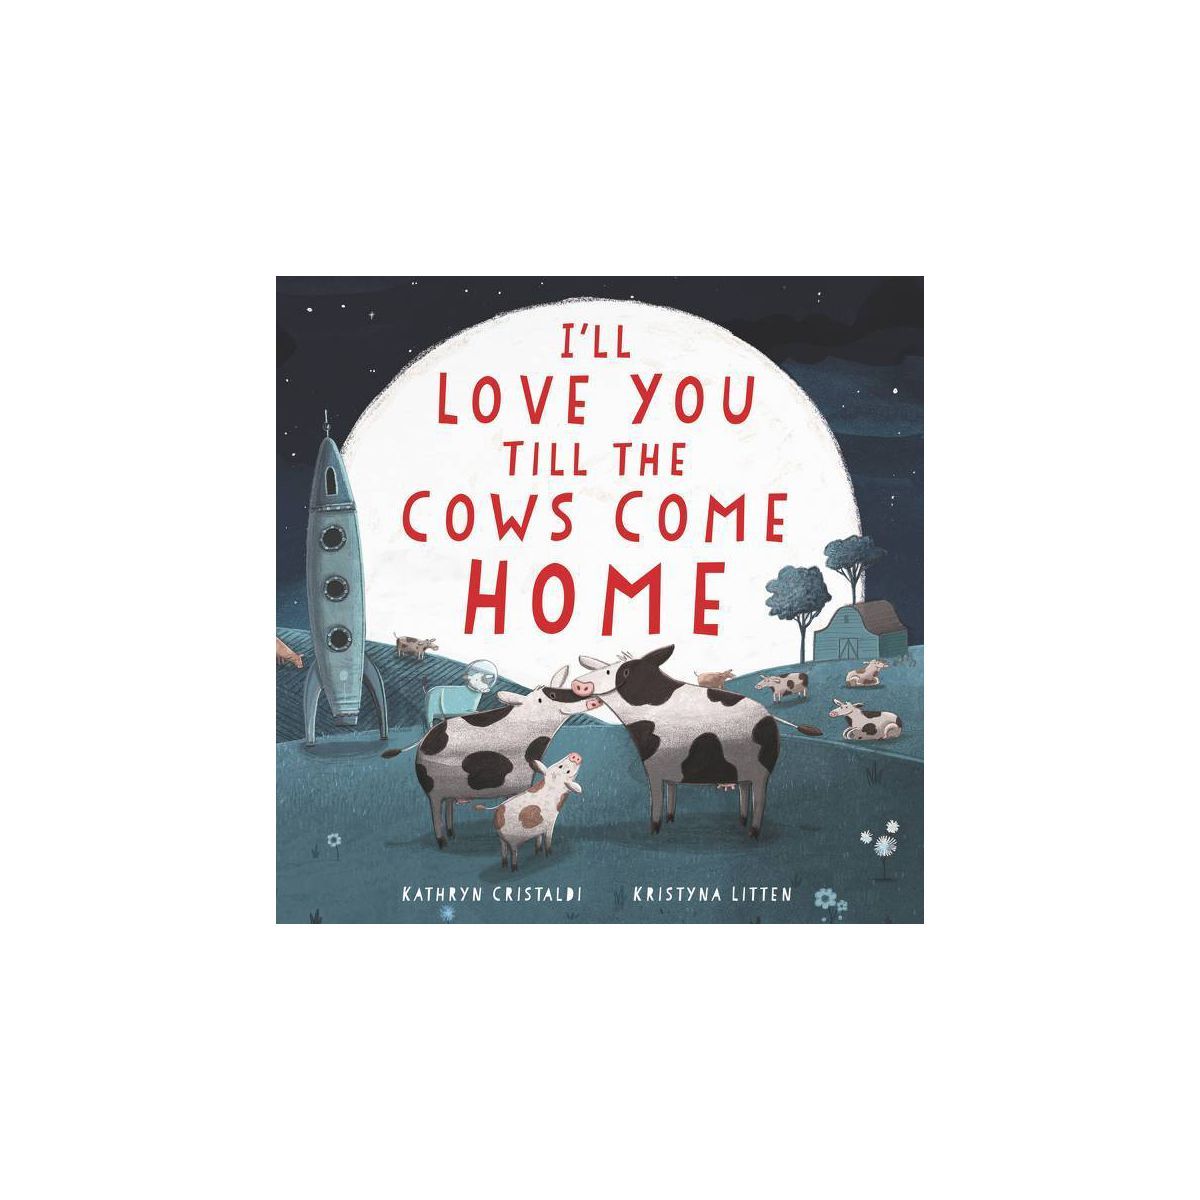 I'll Love You Till the Cows Come Home - by Kathryn Cristaldi | Target